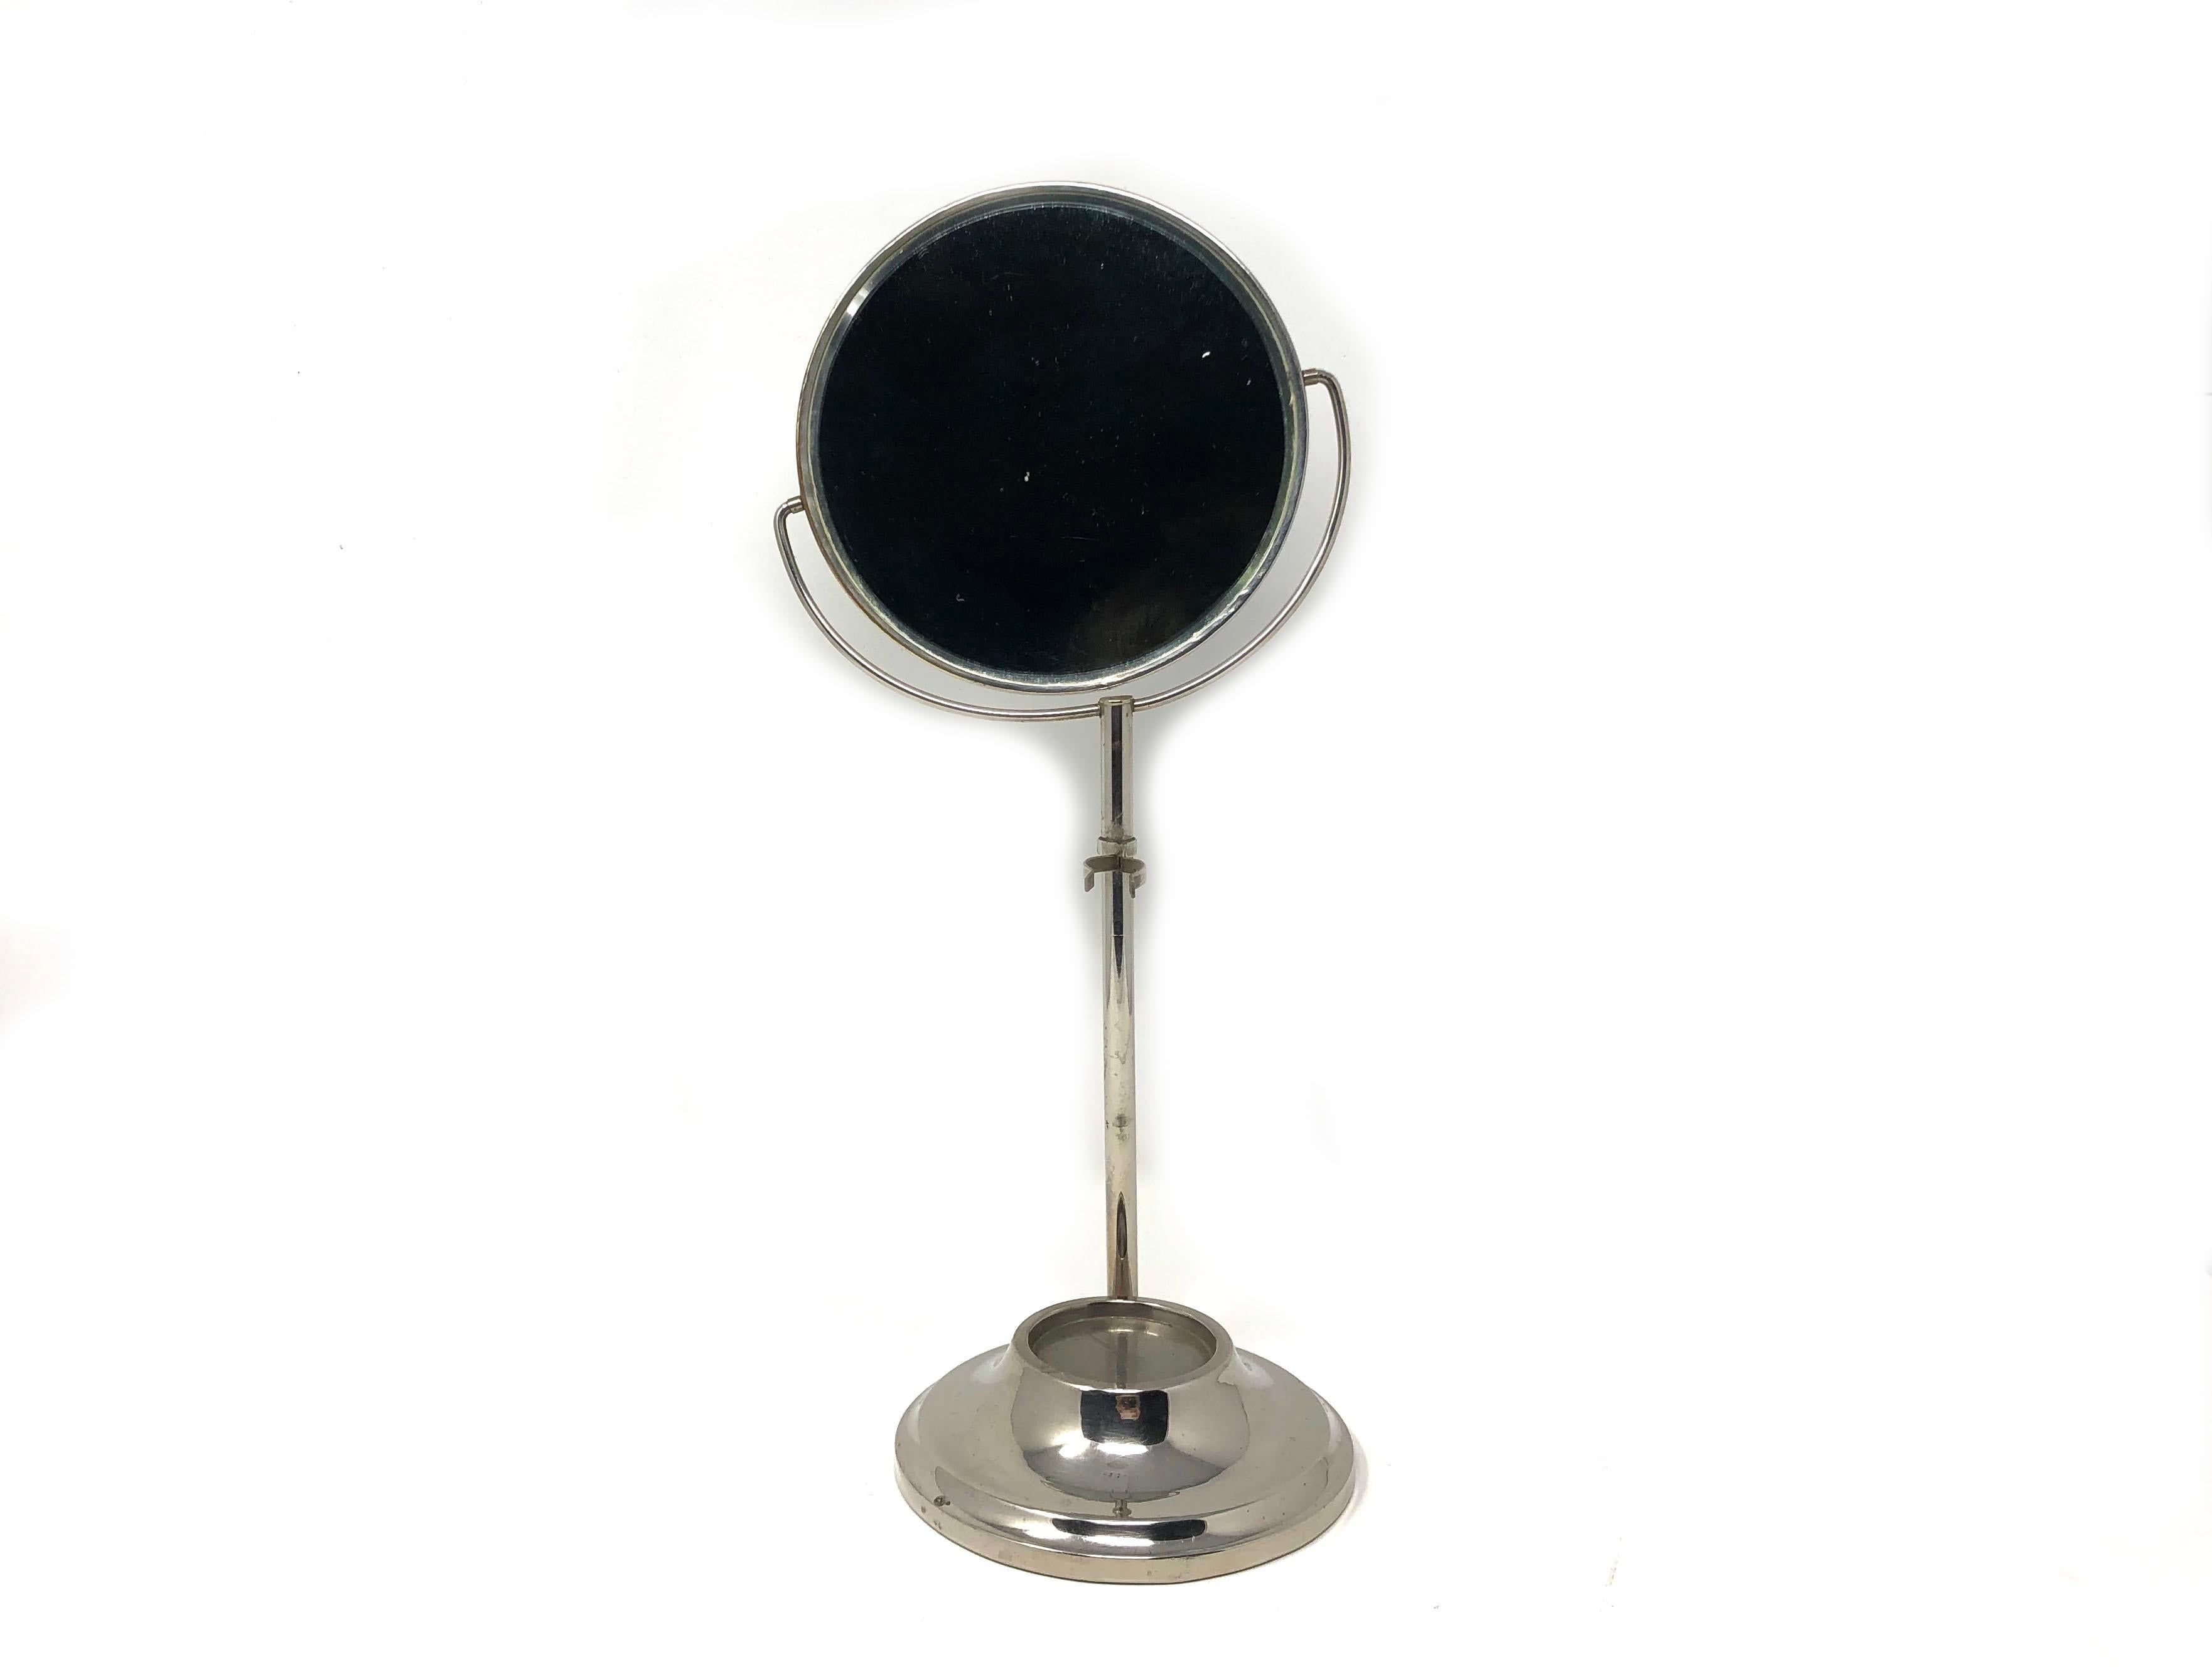 Handsome antique chrome shaving mirror on stand with hanging razor holder and inset shaving cup holder. Elegant with lovely shape. Finish appears to be chrome. Very heavy as there is cast iron in the base. Mirror tilts up and down. 

The base is